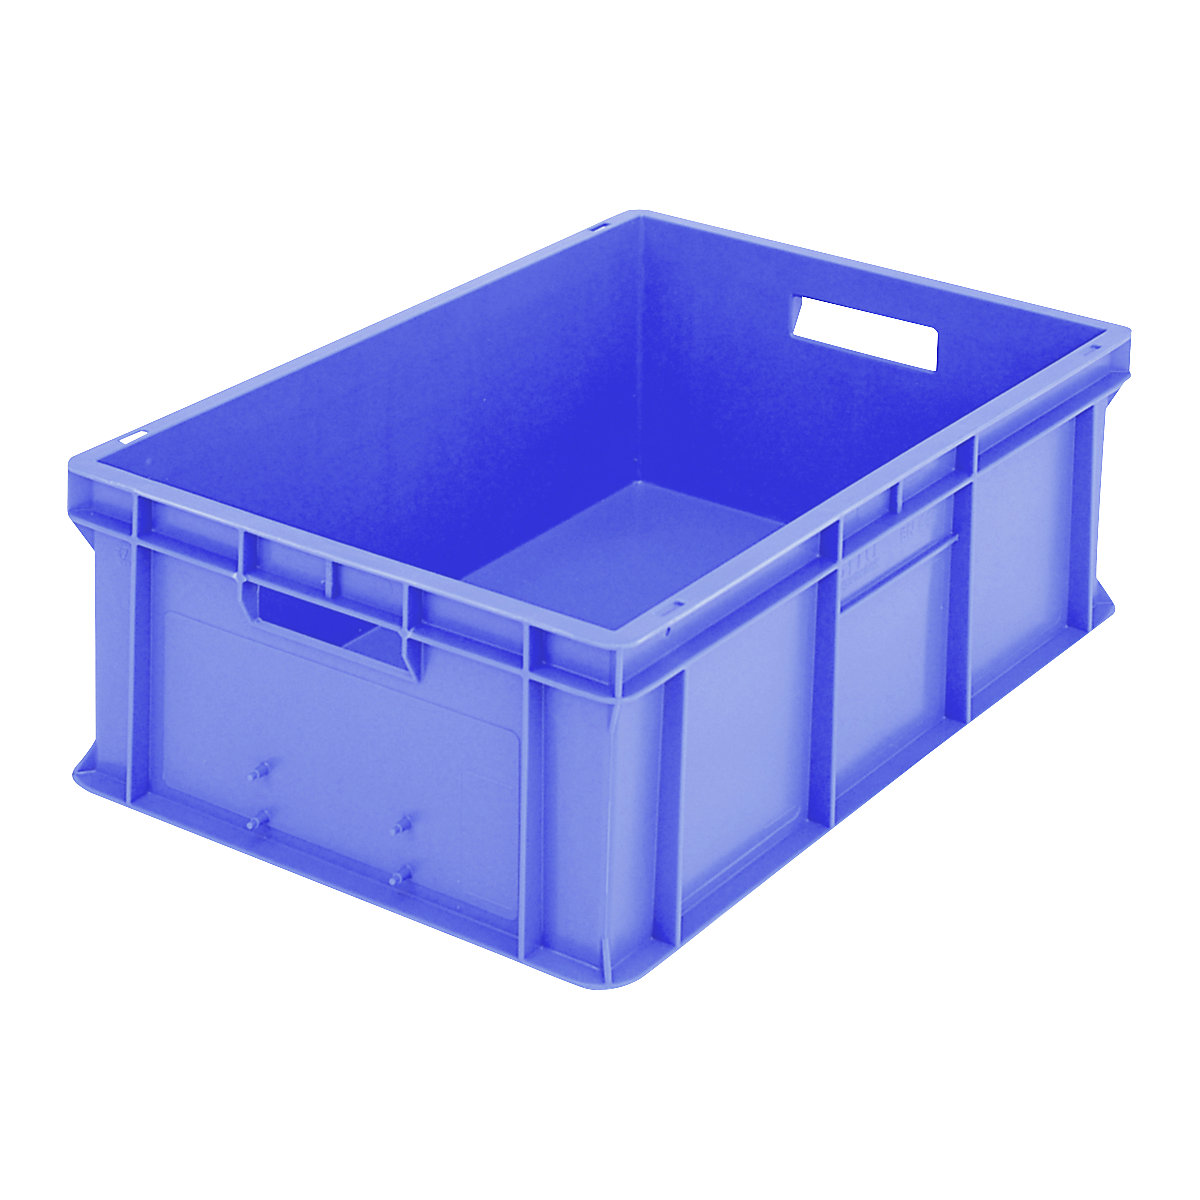 BN Euro stacking container – BITO, solid walls and base, LxWxH 600 x 400 x 215 mm-4